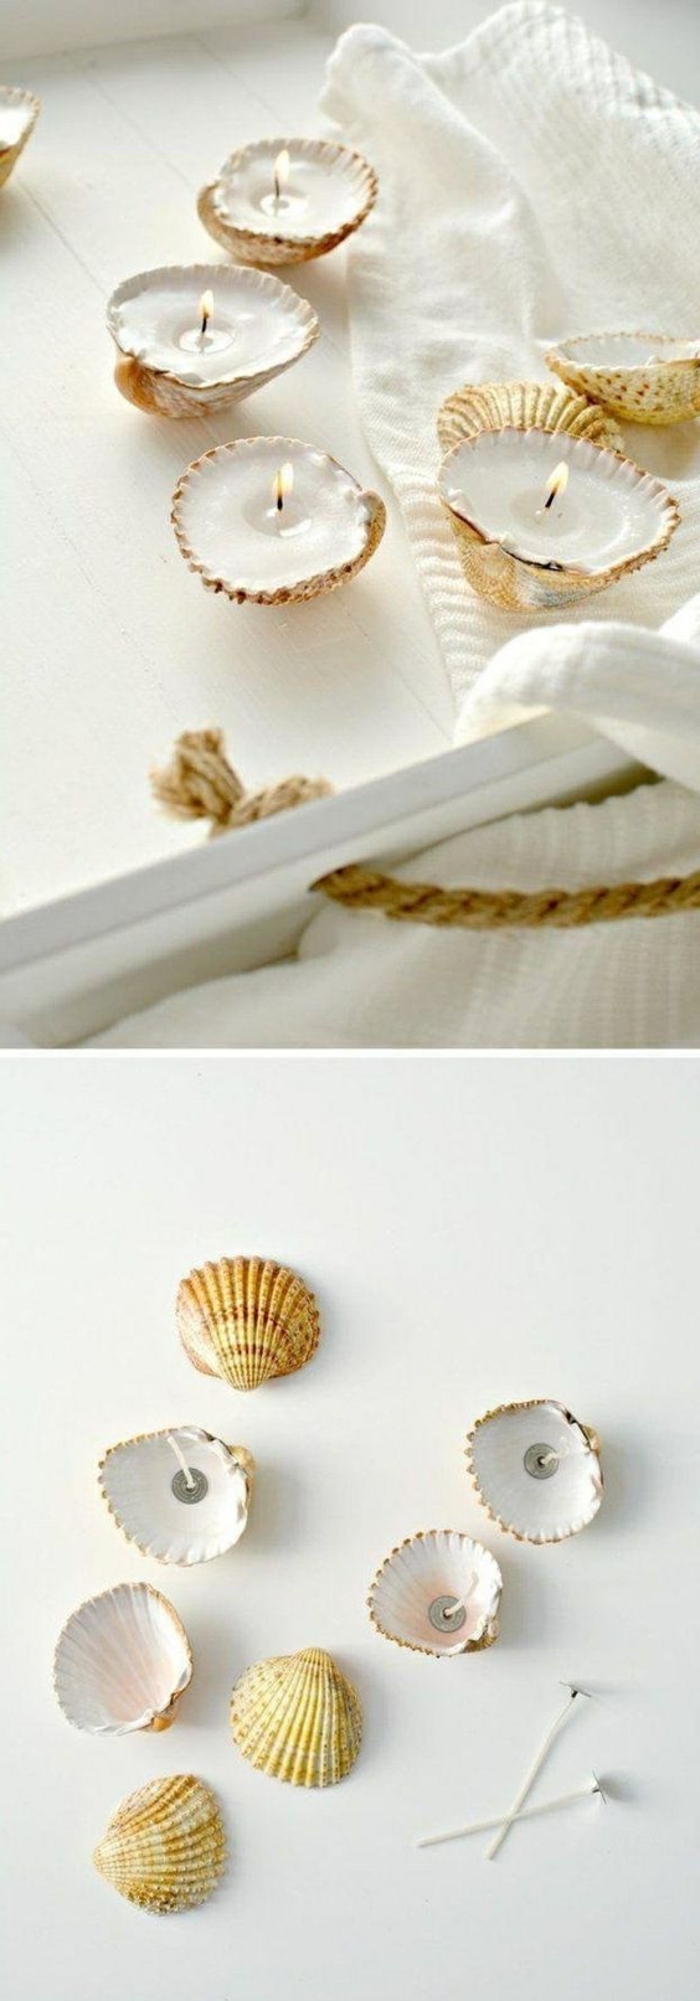 seashell candles, on a white tray, white towel, make your own candles